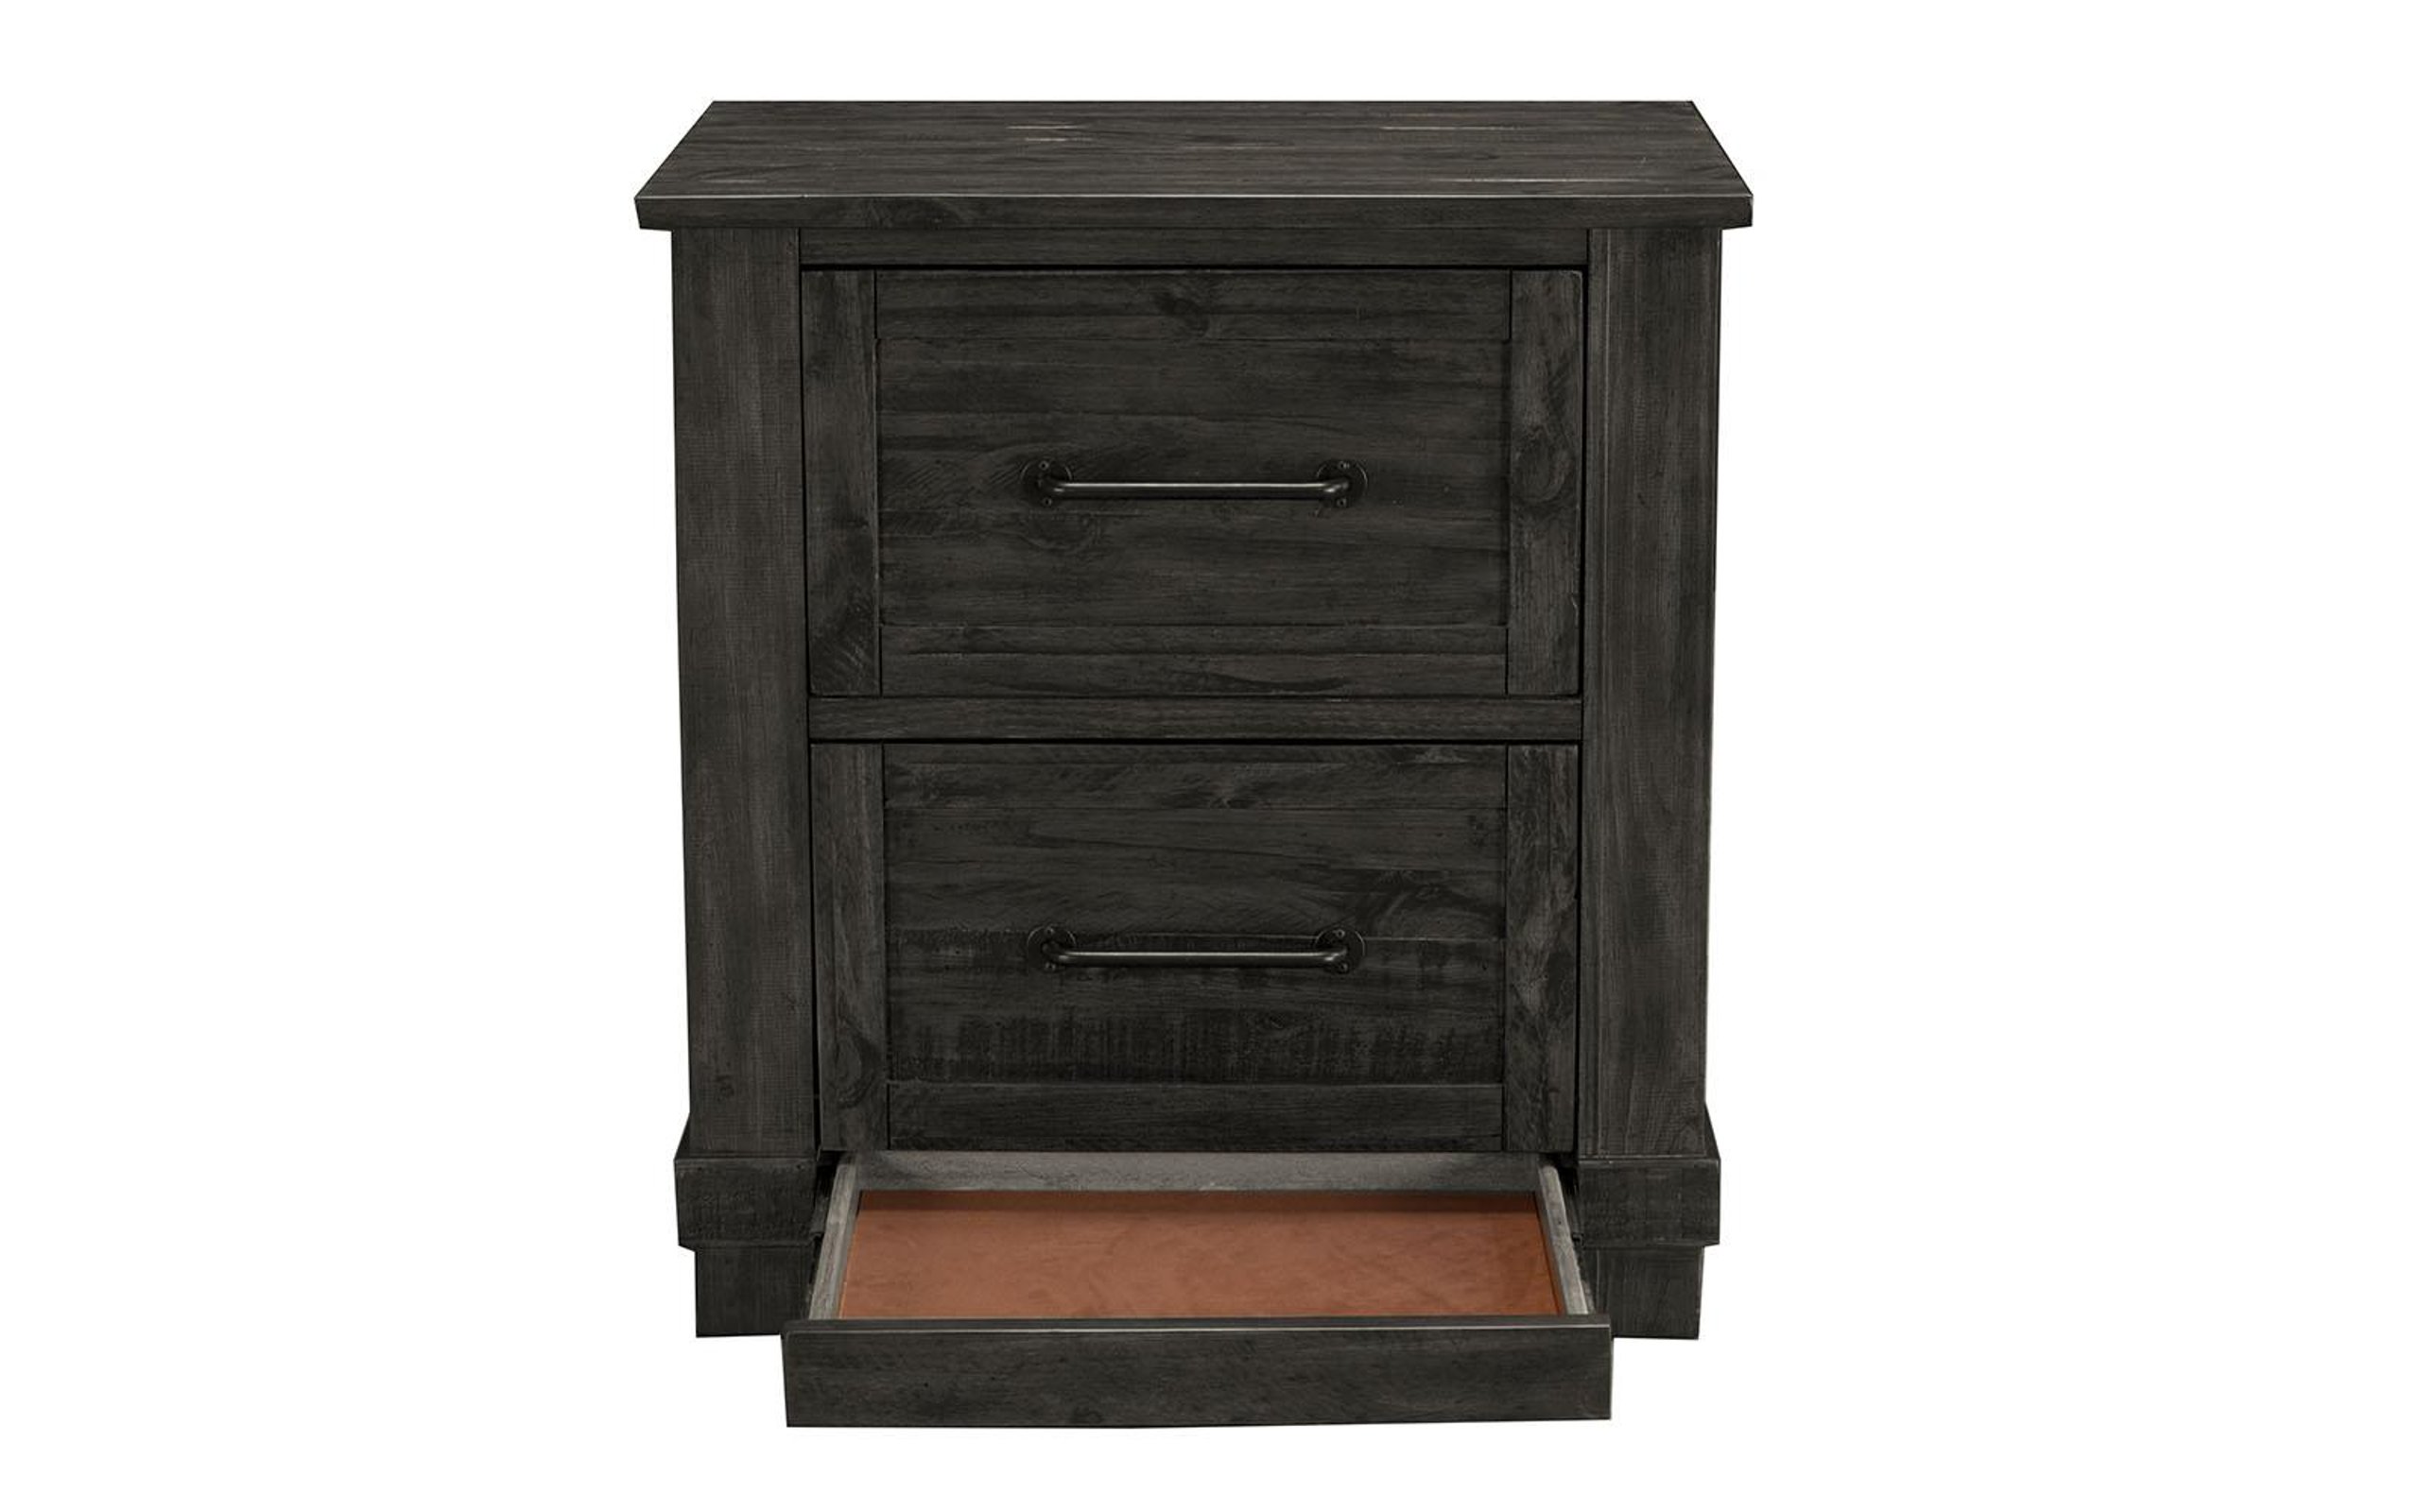 Rustic Queen Rotating Storage Bedroom Set 6pcs Suvcl5092 A America Sun Valley Buy Online On Ny 